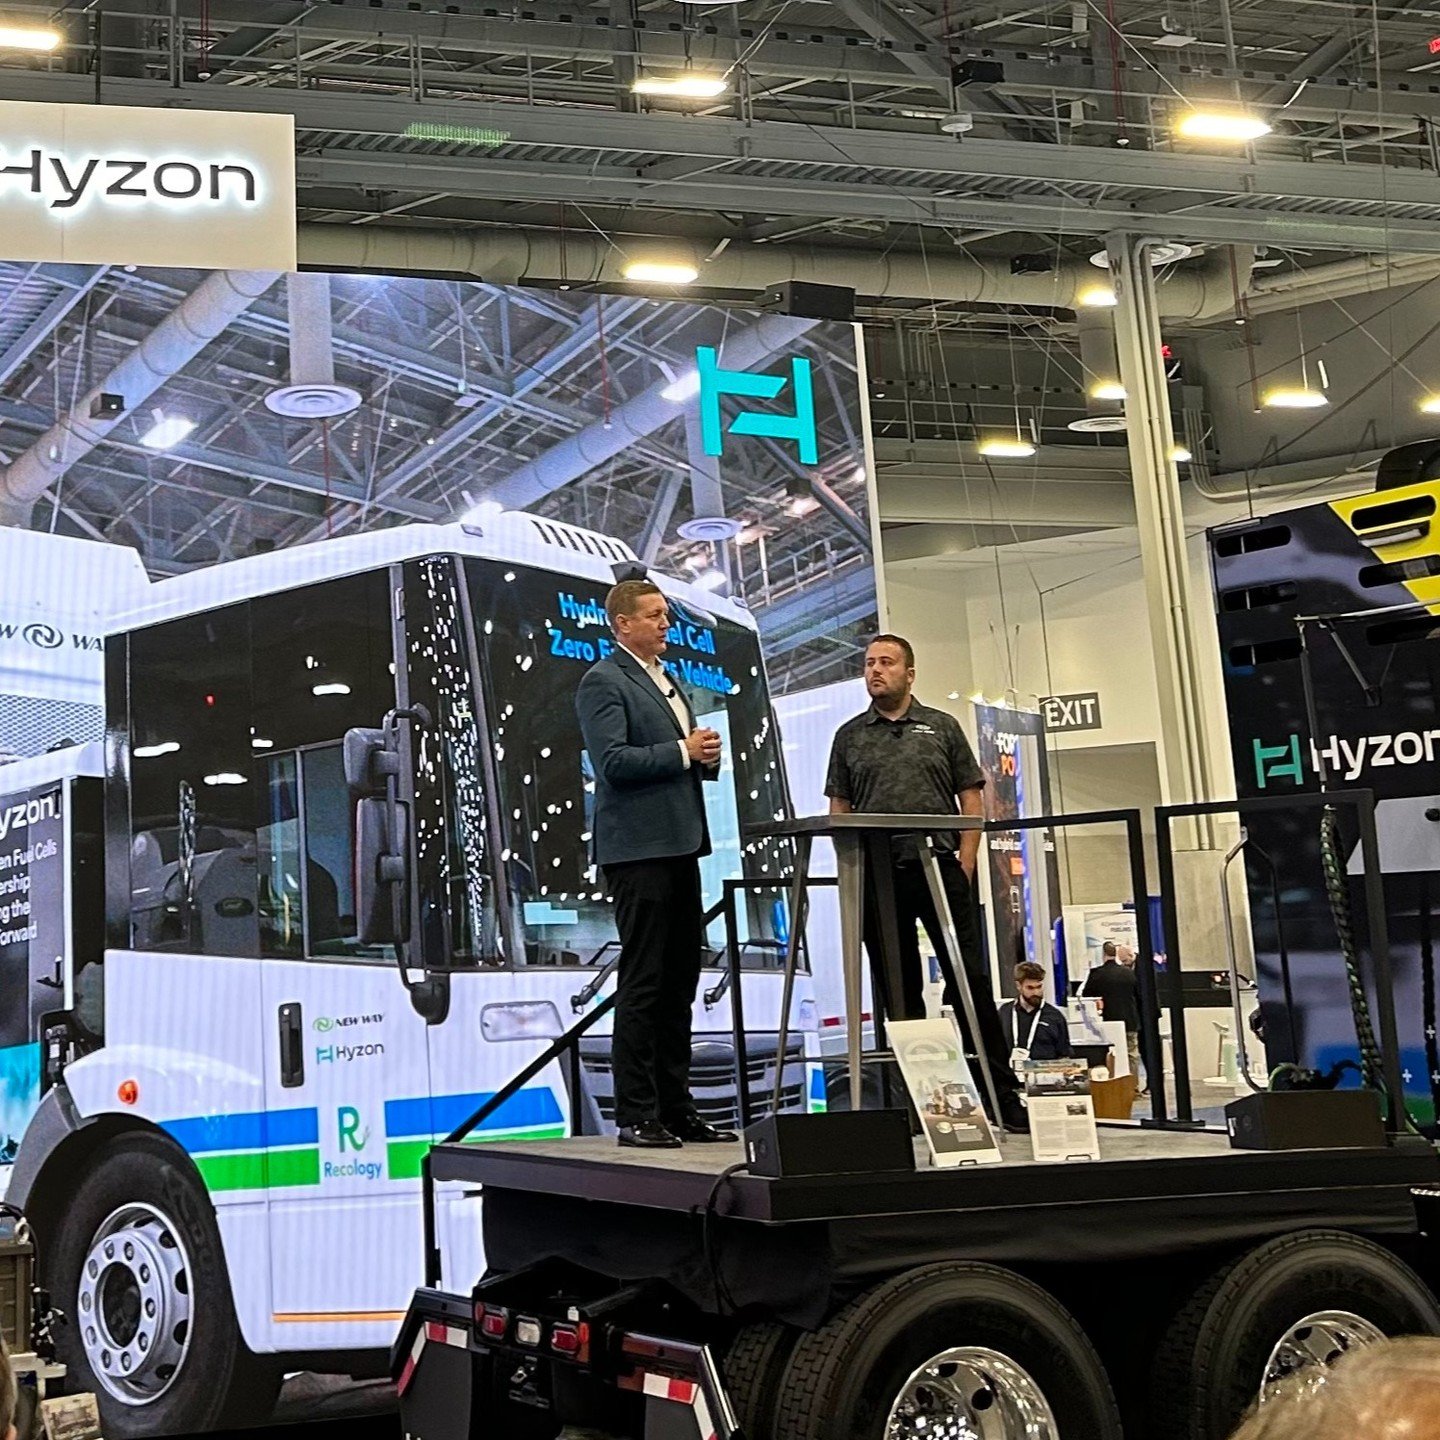 Closing our Hyzon Connects series on a high note, Steve Boyer of Hyzon and Tyler White from @newwaytrucks spelled out how our joint innovation, North America's first hydrogen fuel cell electric refuse truck, is cleaning up garbage collection without 